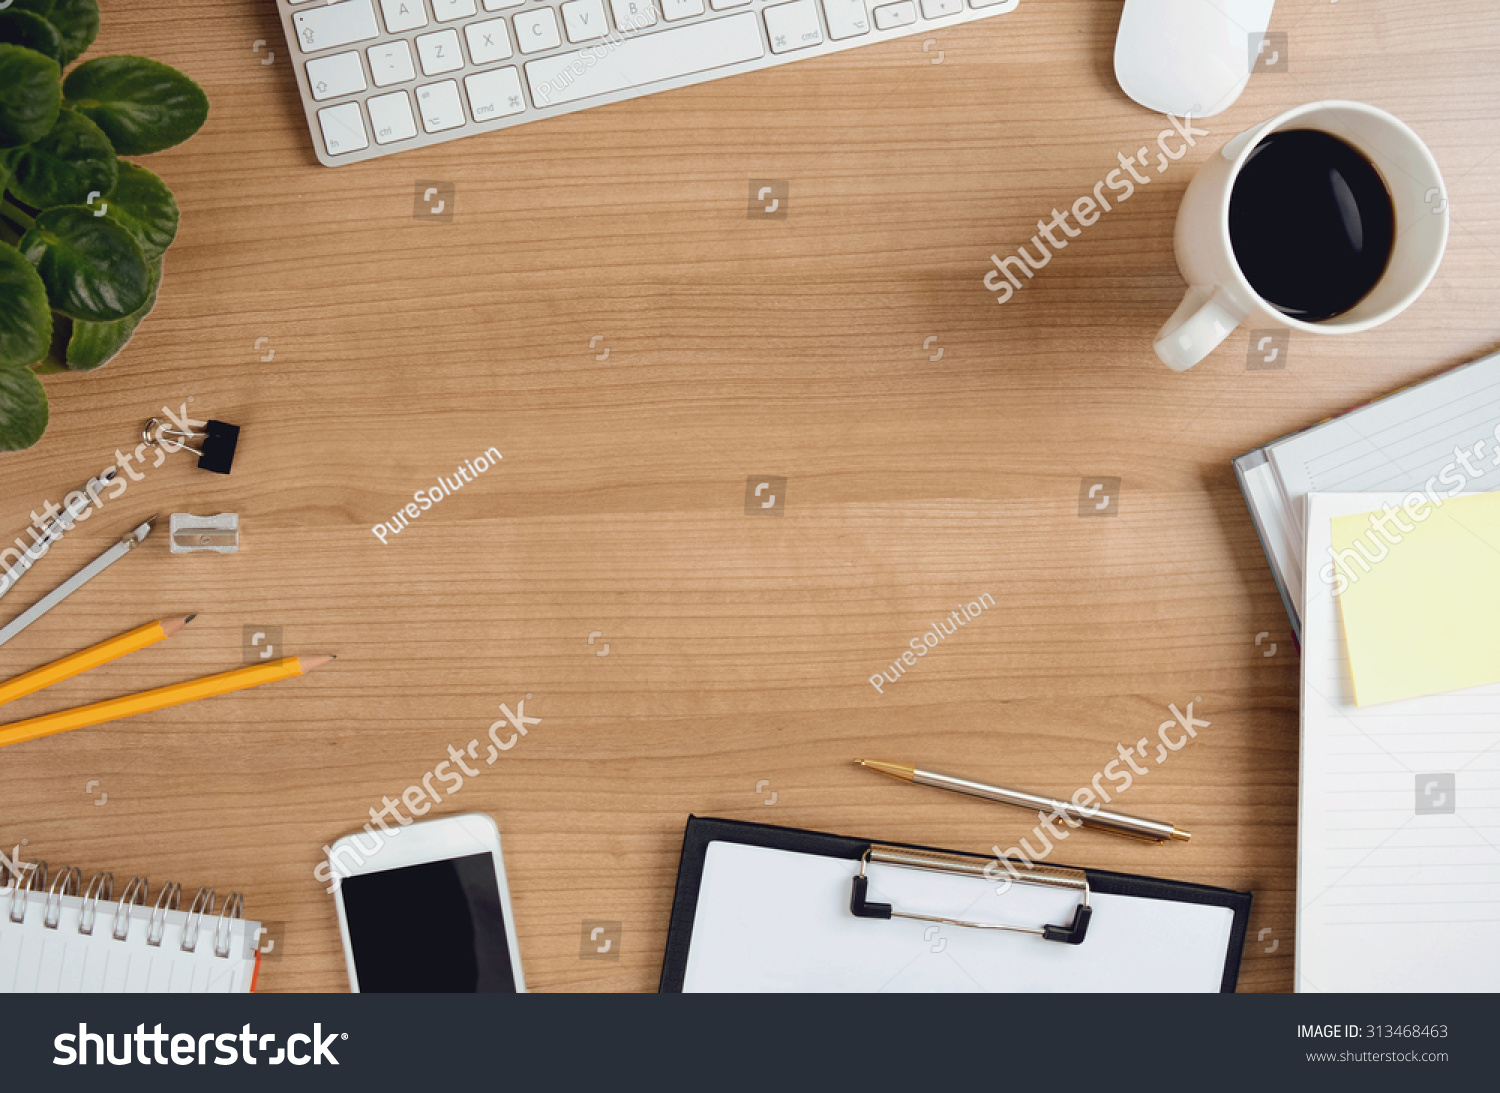 Office desk table with computer, smartphone, supplies, flower and coffee cup. Top view with copy space. Concept for website banner, mockup, background, presentation and marketing material.  #313468463